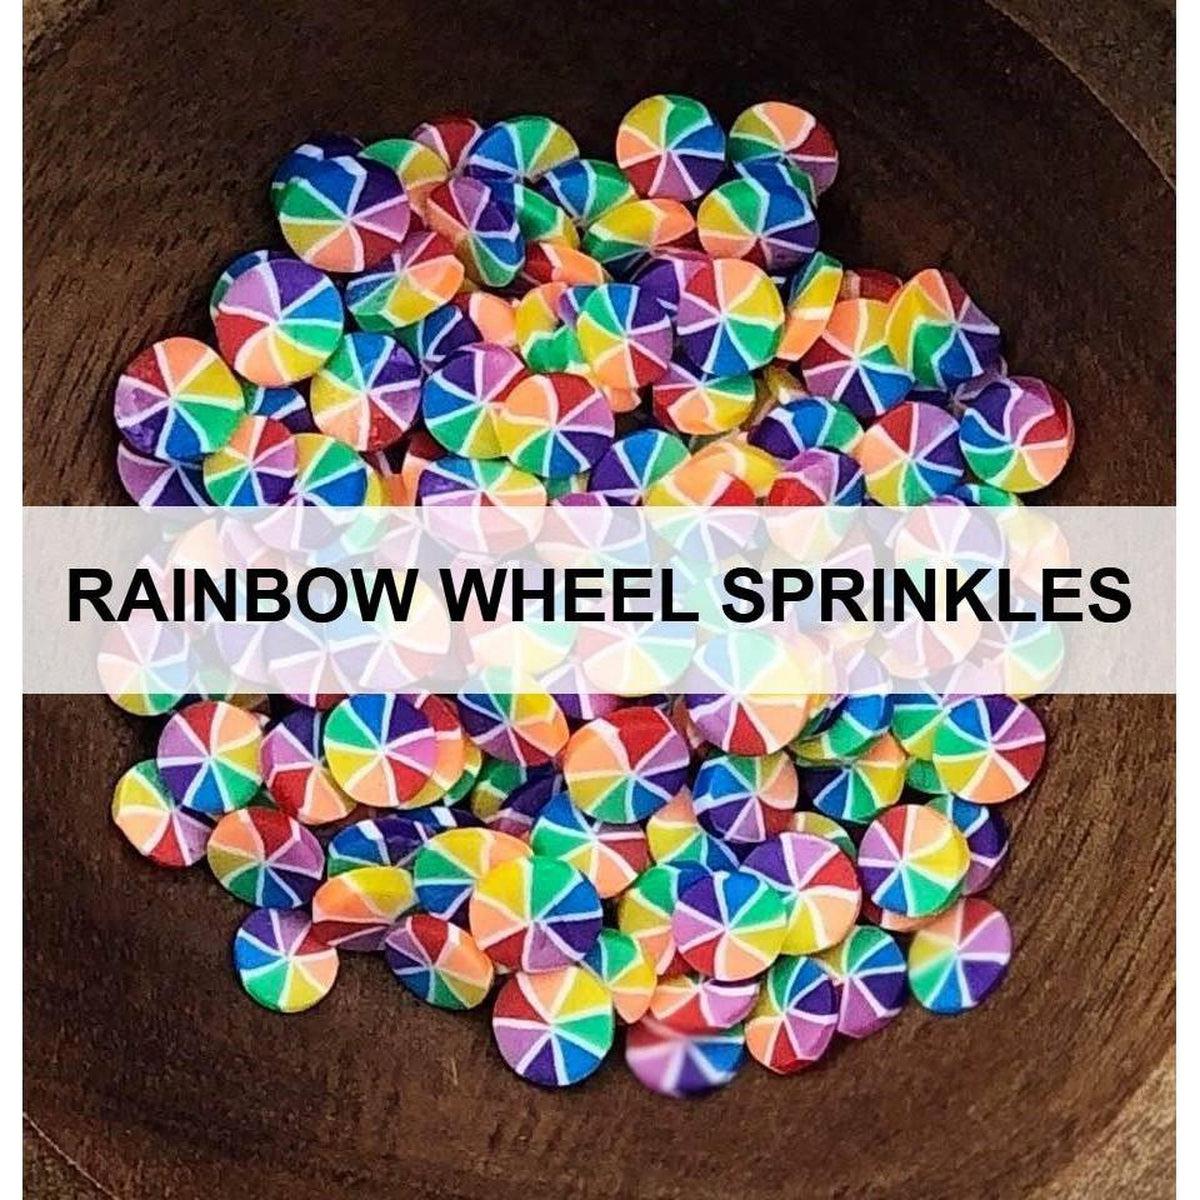 Rainbow Wheel Sprinkles by Kat Scrappiness - Kat Scrappiness